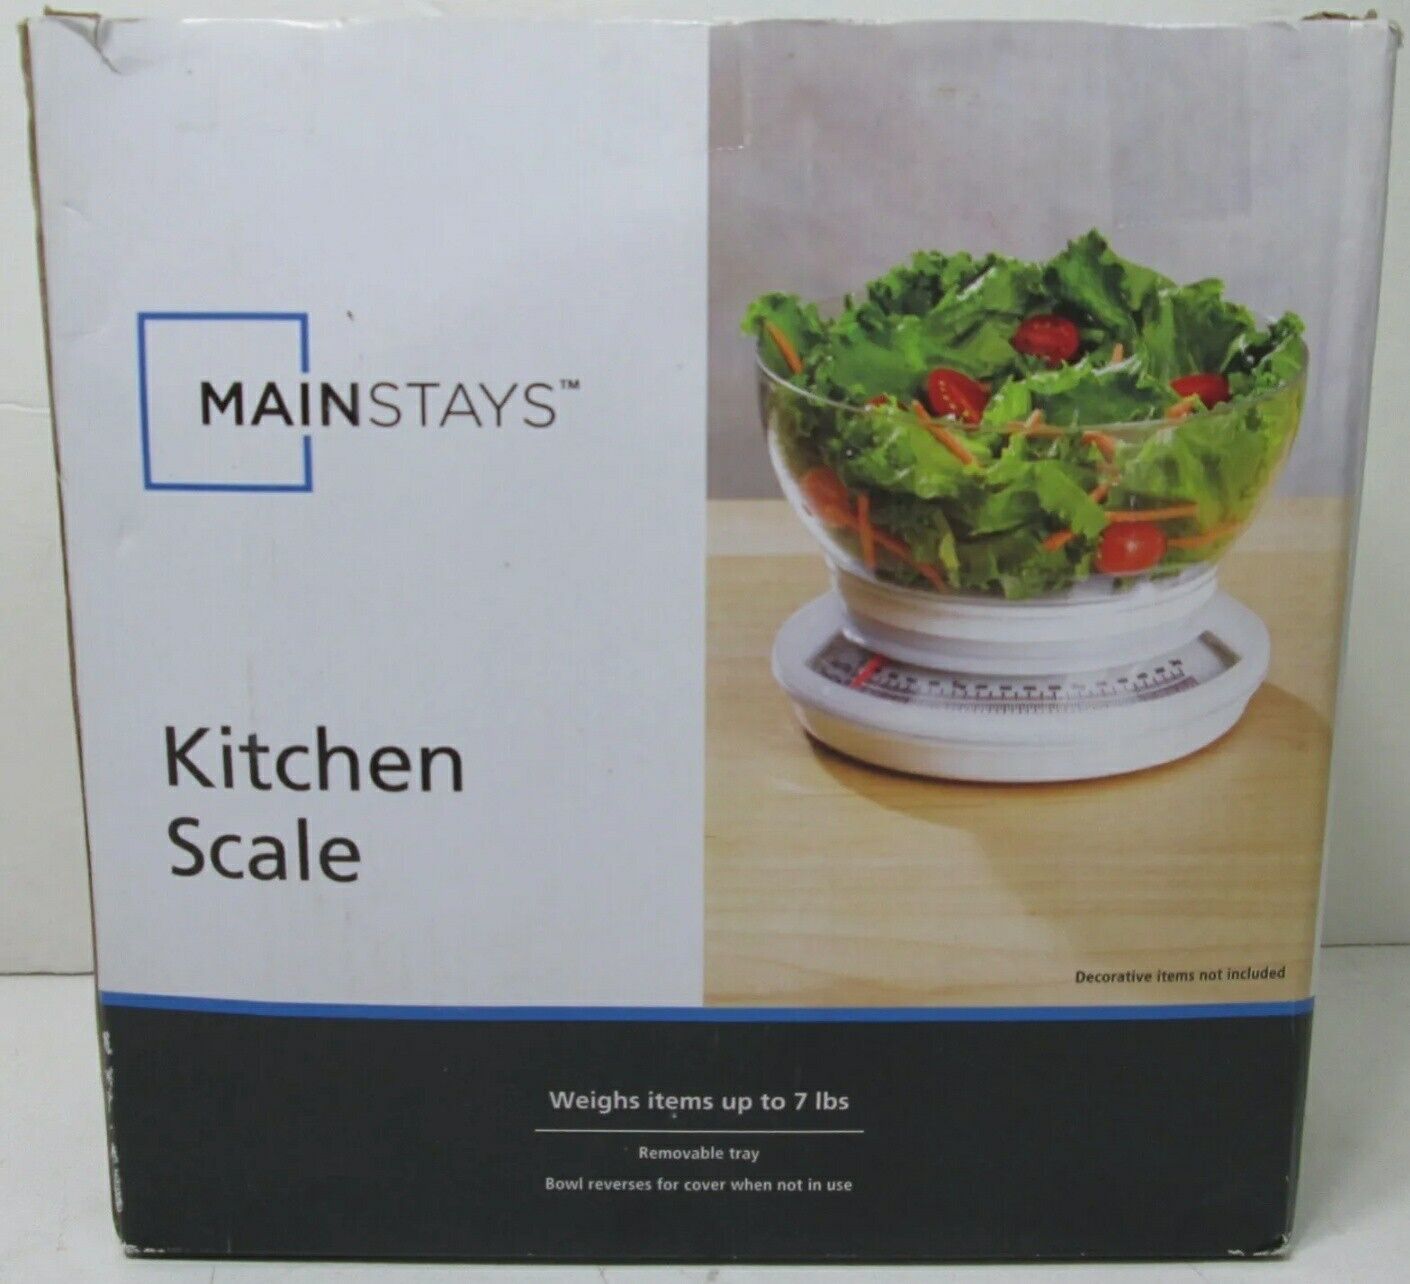 Mainstays Kitchen Food Scale Weight Up To 7 lbs Removable Tray - Used - $7.69